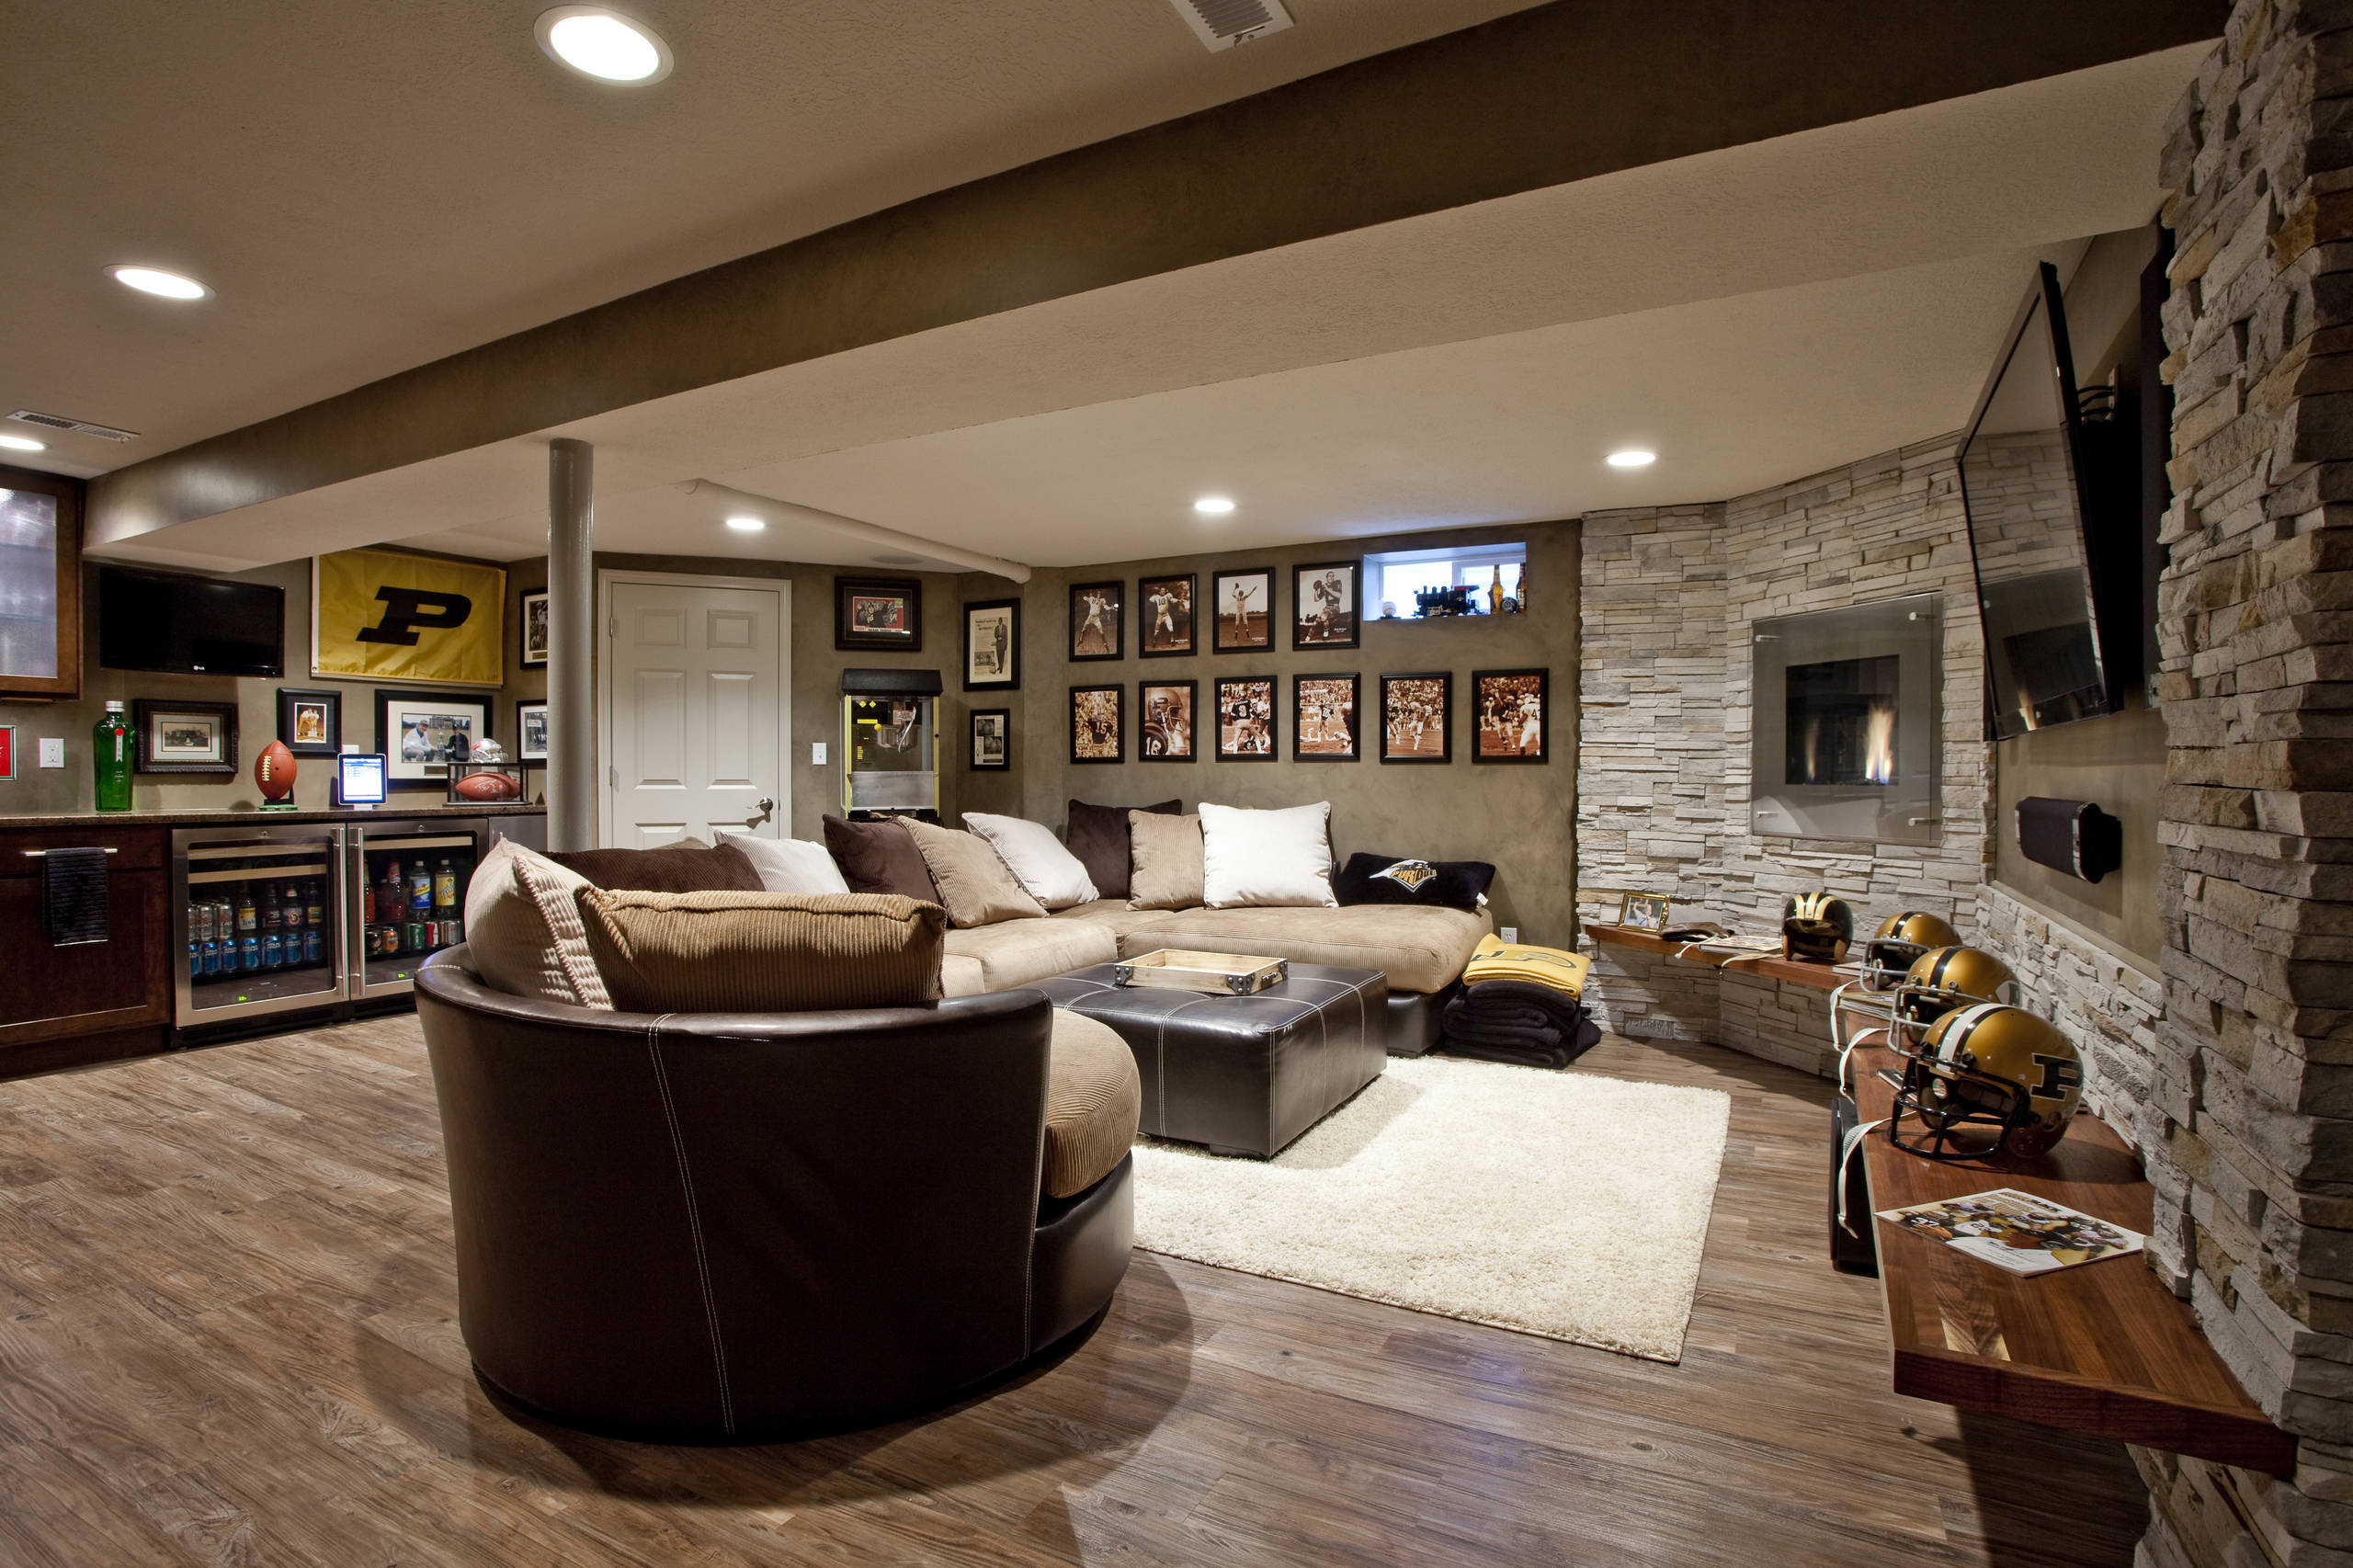 Man Cave Ideas - Here ís a sports bar in the basement. A pro